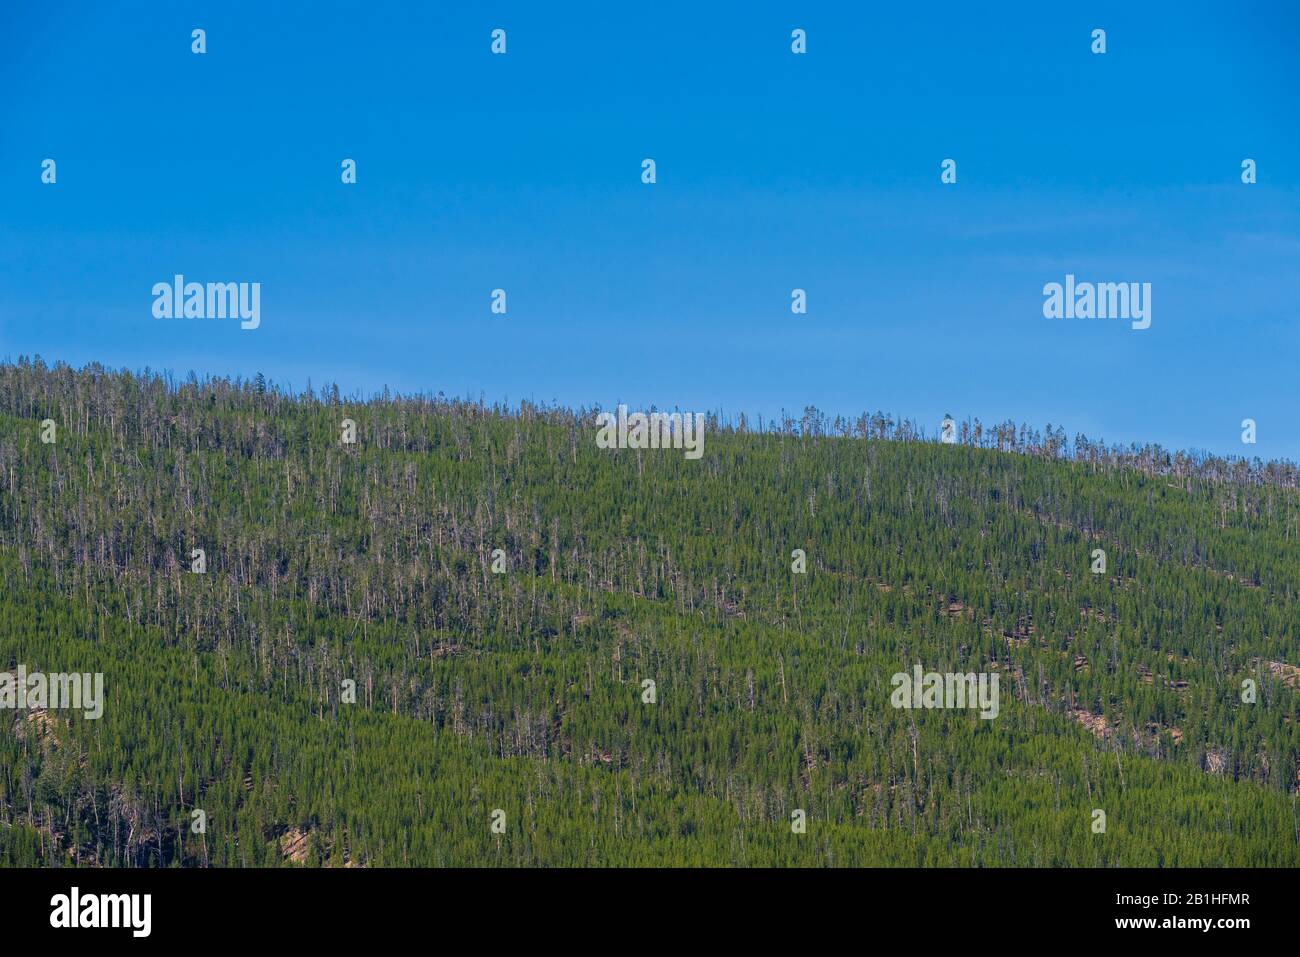 Green pin trees cover hillside under a blue sky. Stock Photo